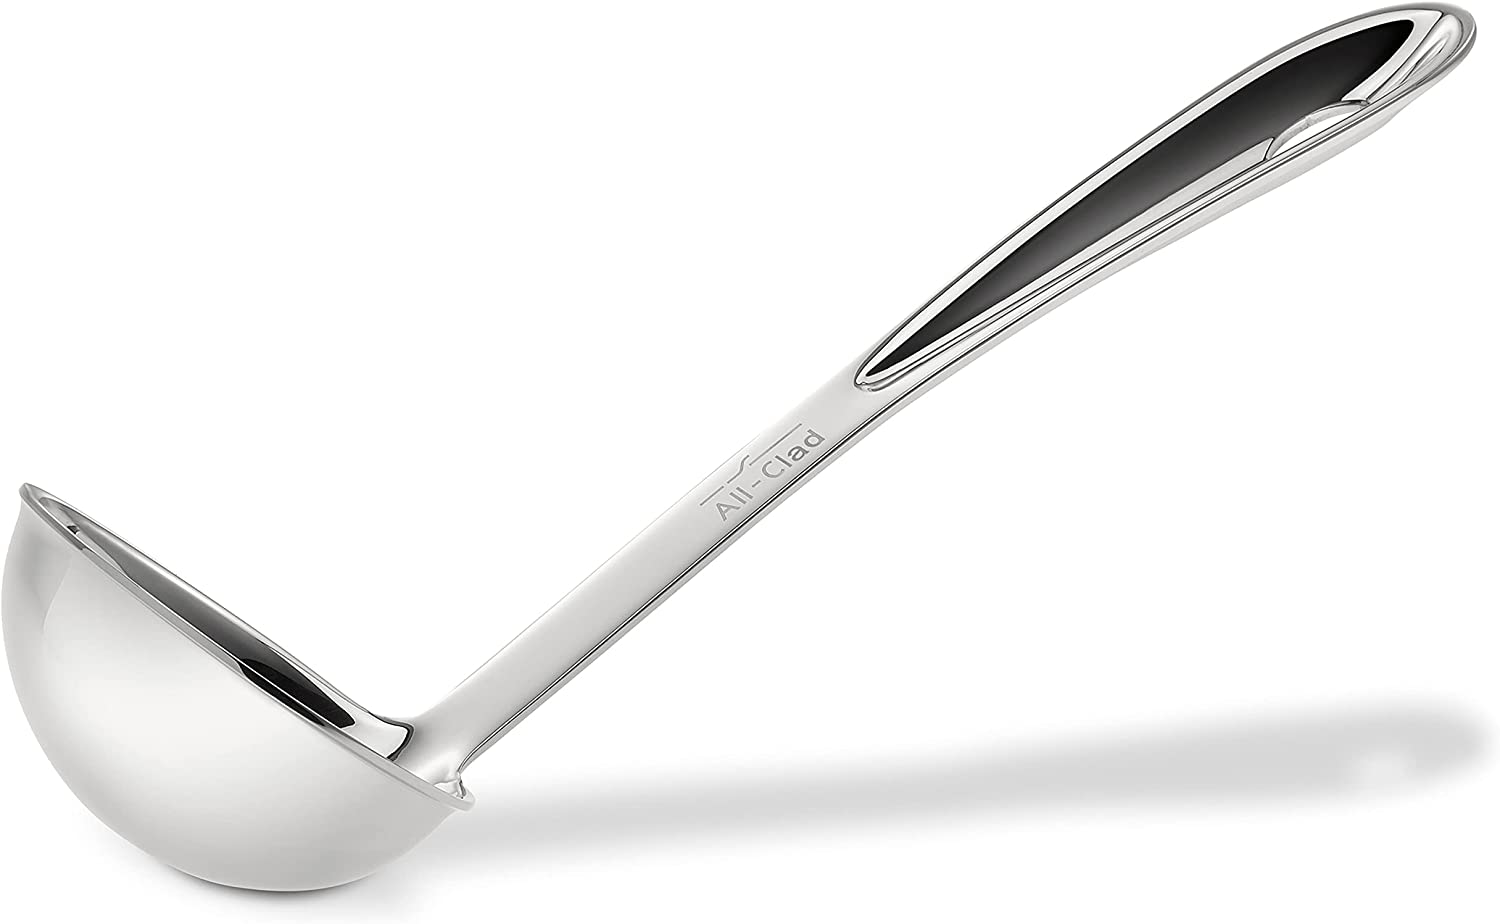 All-Clad Cook & Serve Stainless Steel Soup Ladle, 10 inch, Silver